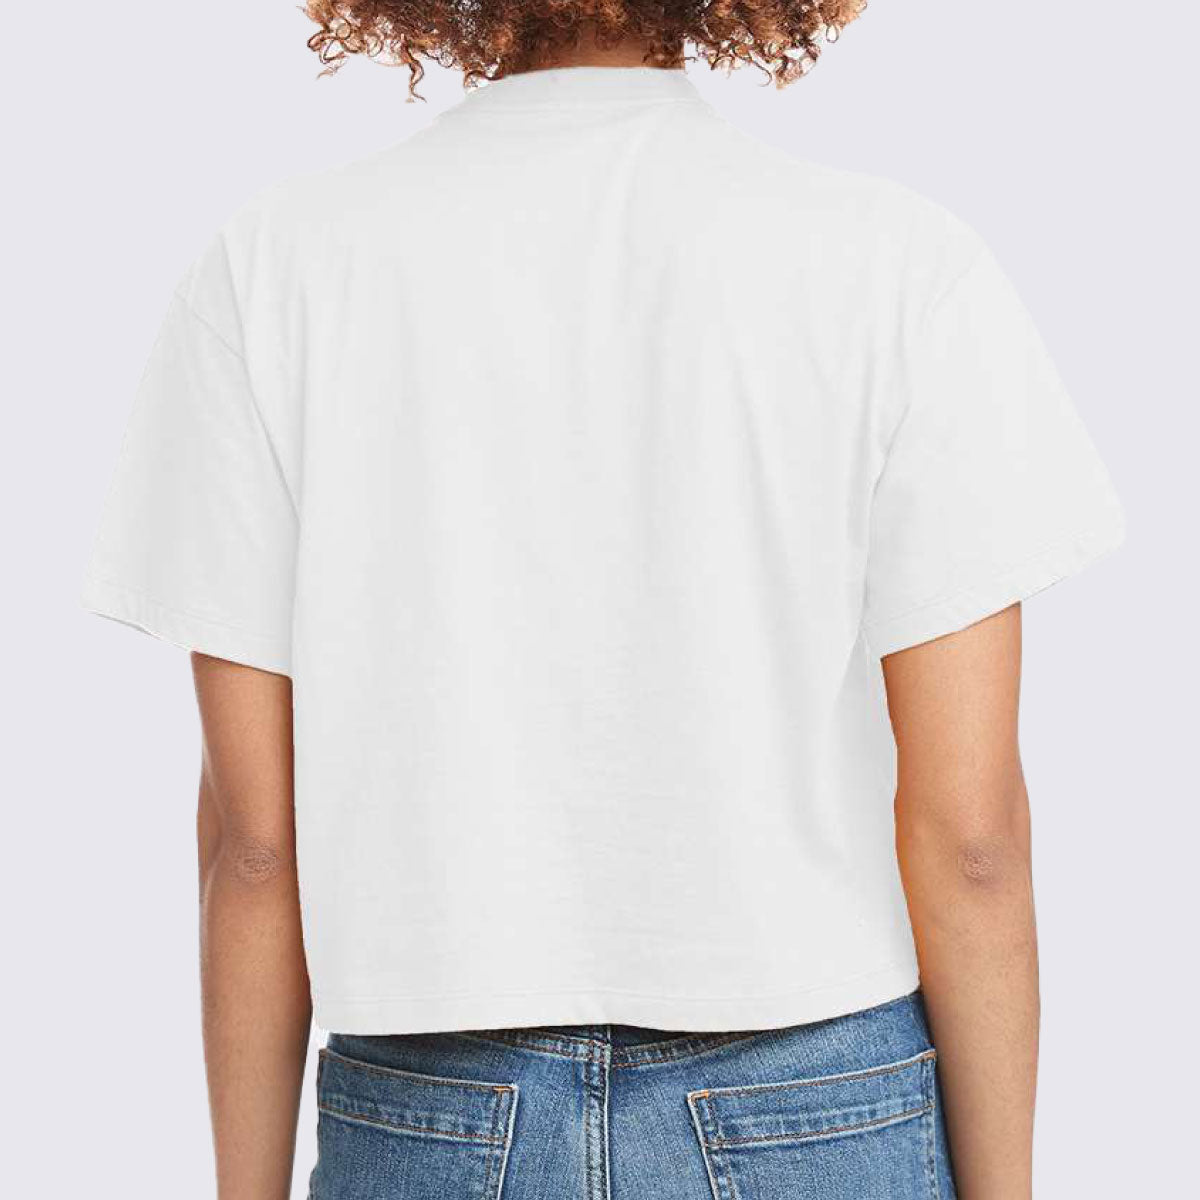 Therapy Women’s Ideal Crop Tee